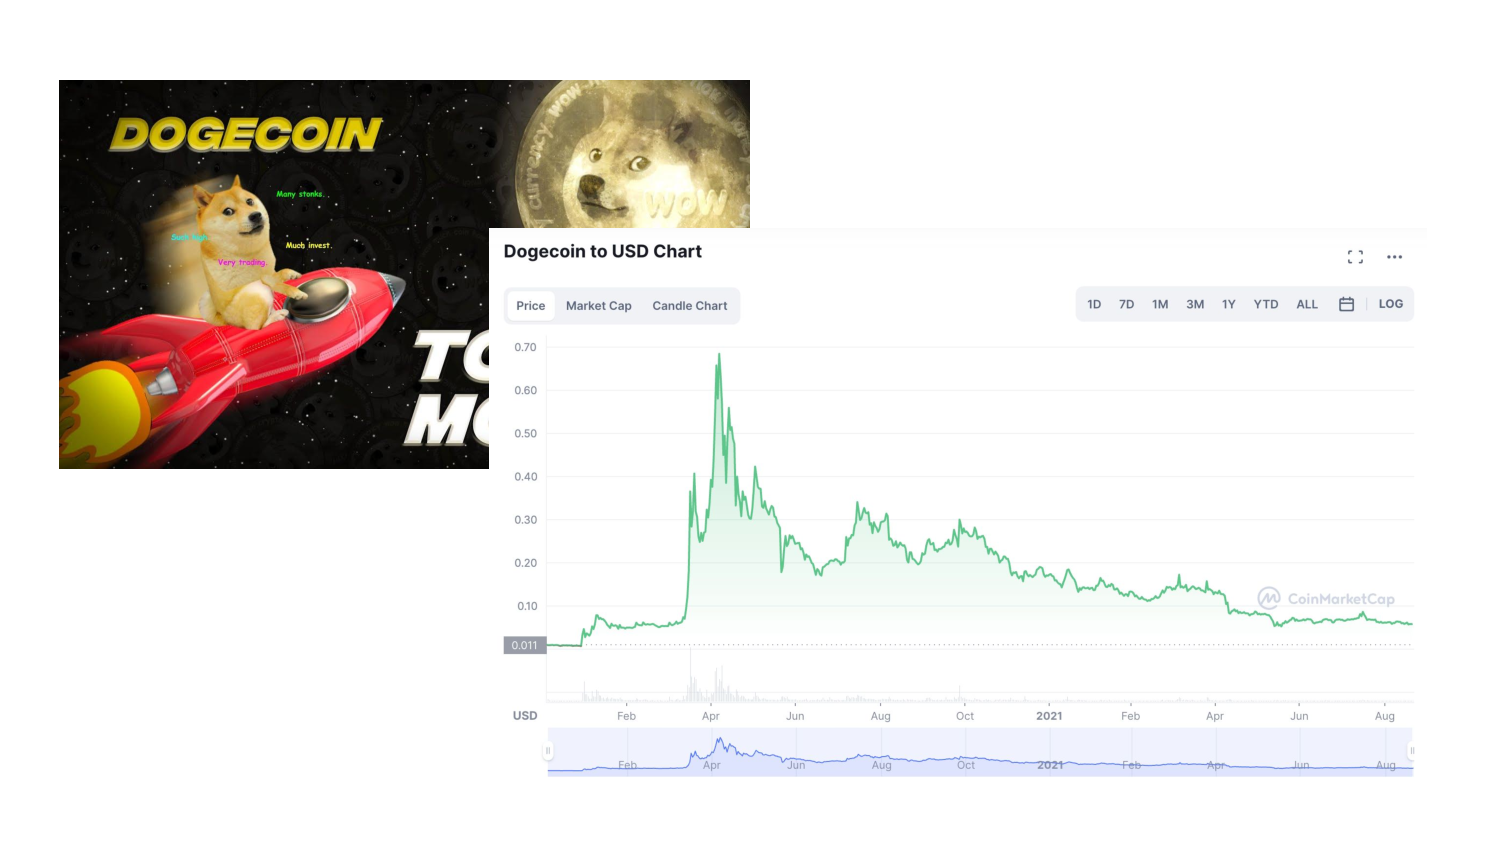 A Dogecoin meme showing a Shiba Inu dog in a red rocketship, pointing toward a moon with another doge face on it. On the right is a graph showing the Dogecoin price history. There is a lalrge spike around April 2020, followed by a quick decline, then a more gradual decline through to the present day.